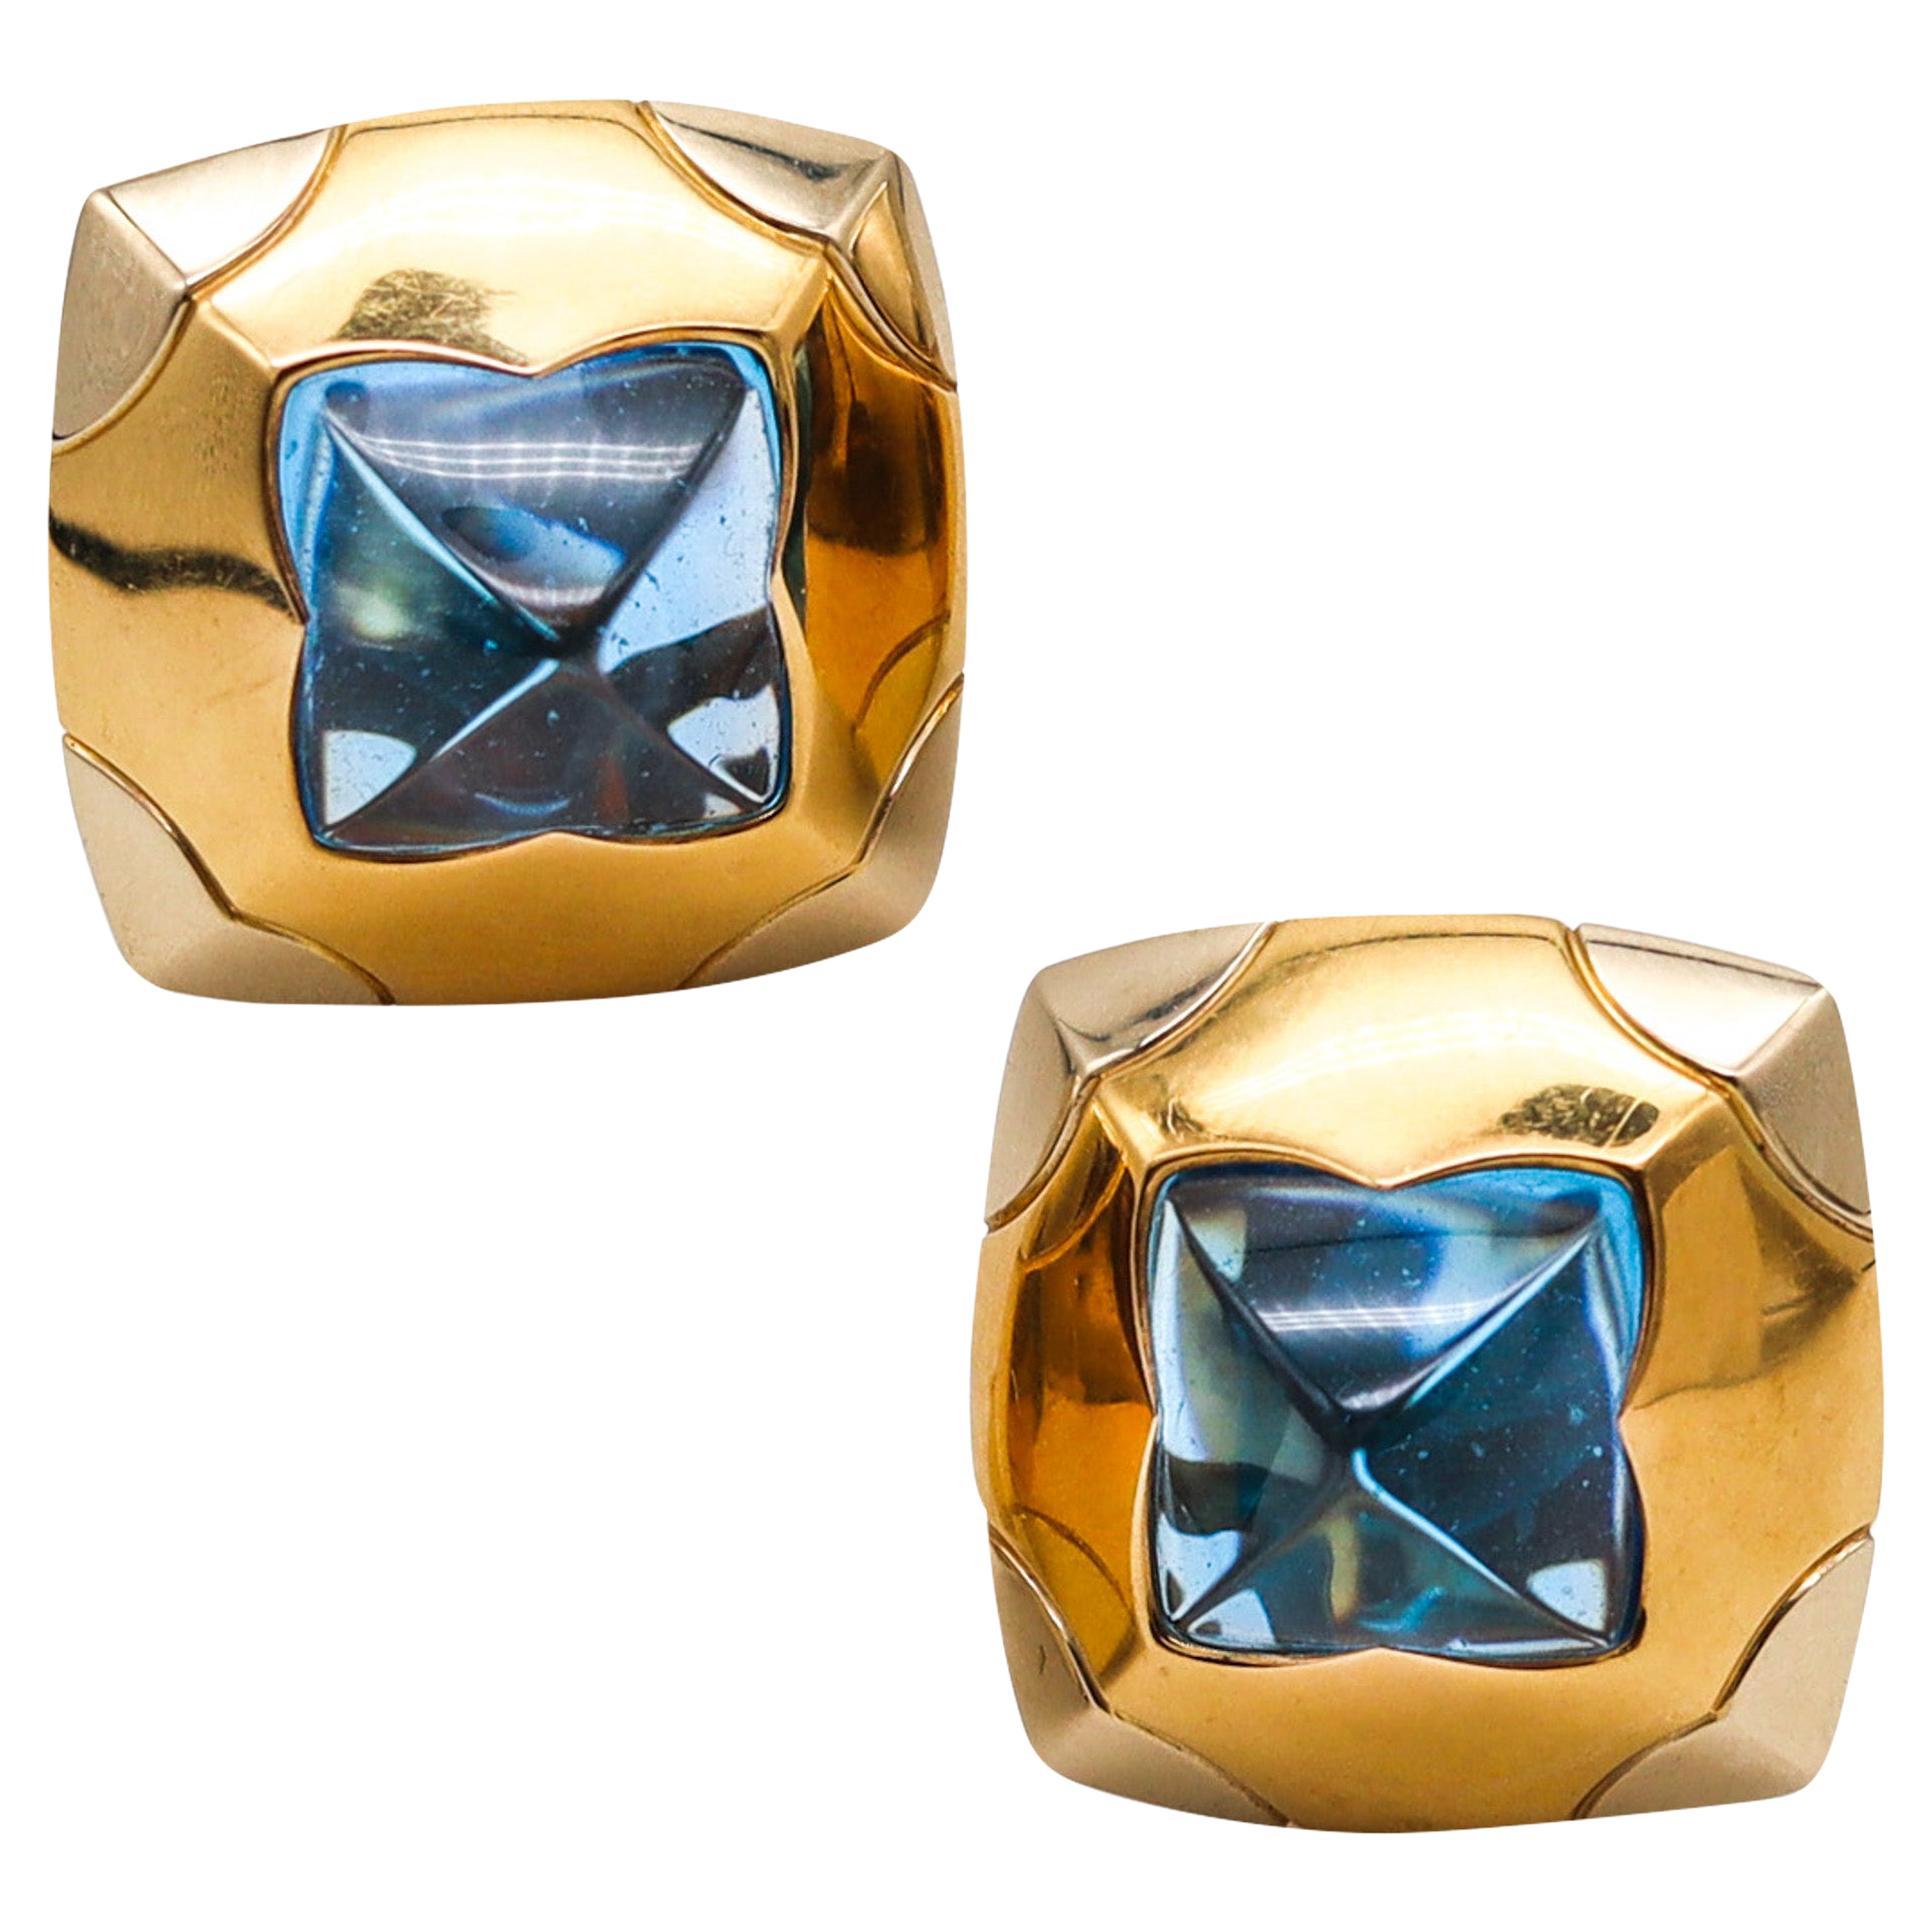 Bvlgari Roma Pyramid Clips Earrings in 18kt Gold with 36ctw Carved Blue Topaz For Sale